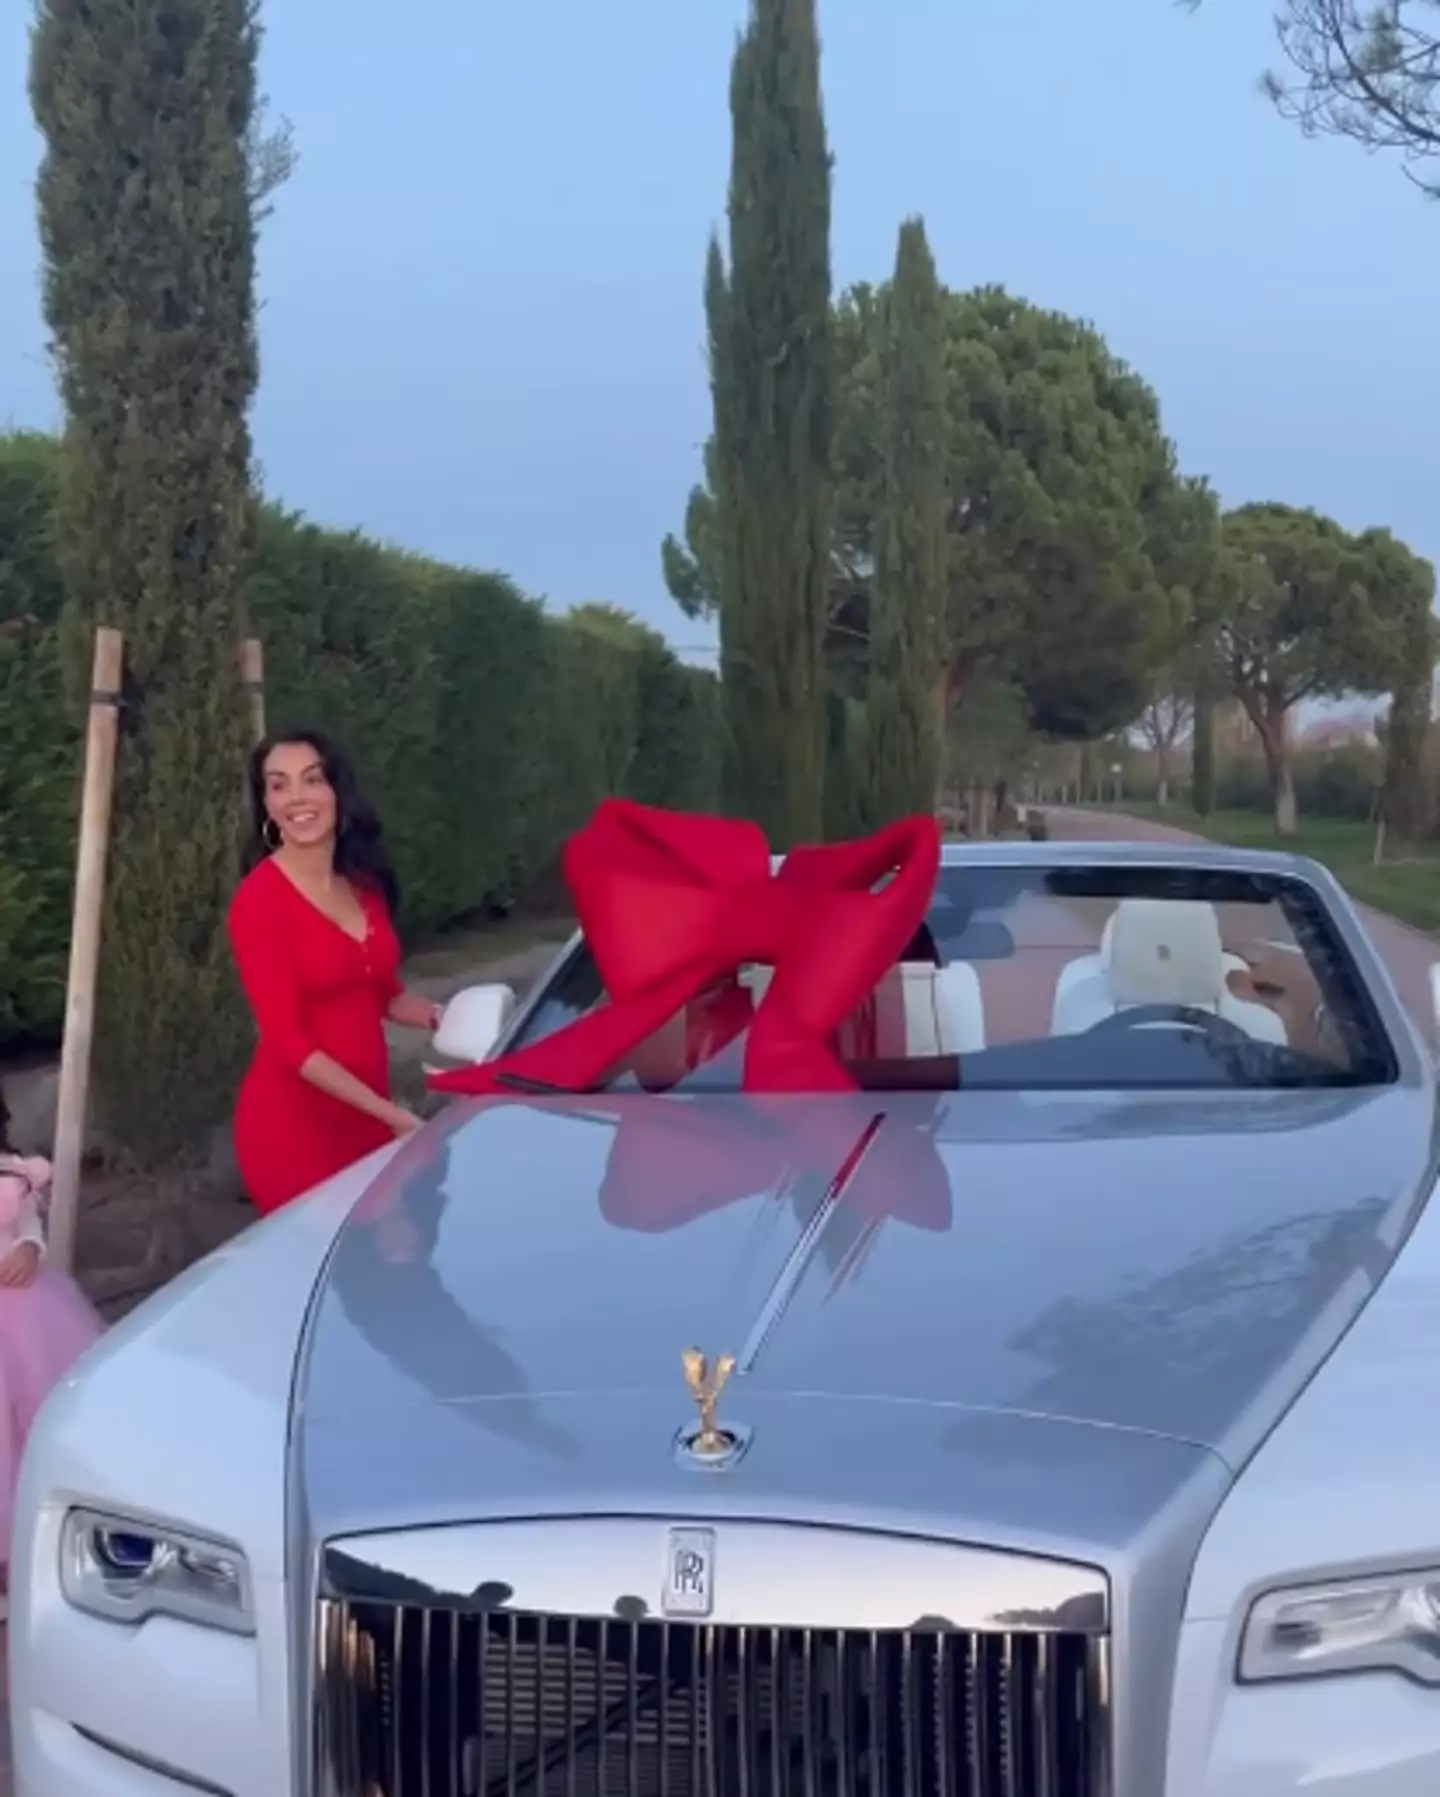 Ronaldo was surprised with the Rolls Royce on Christmas day.